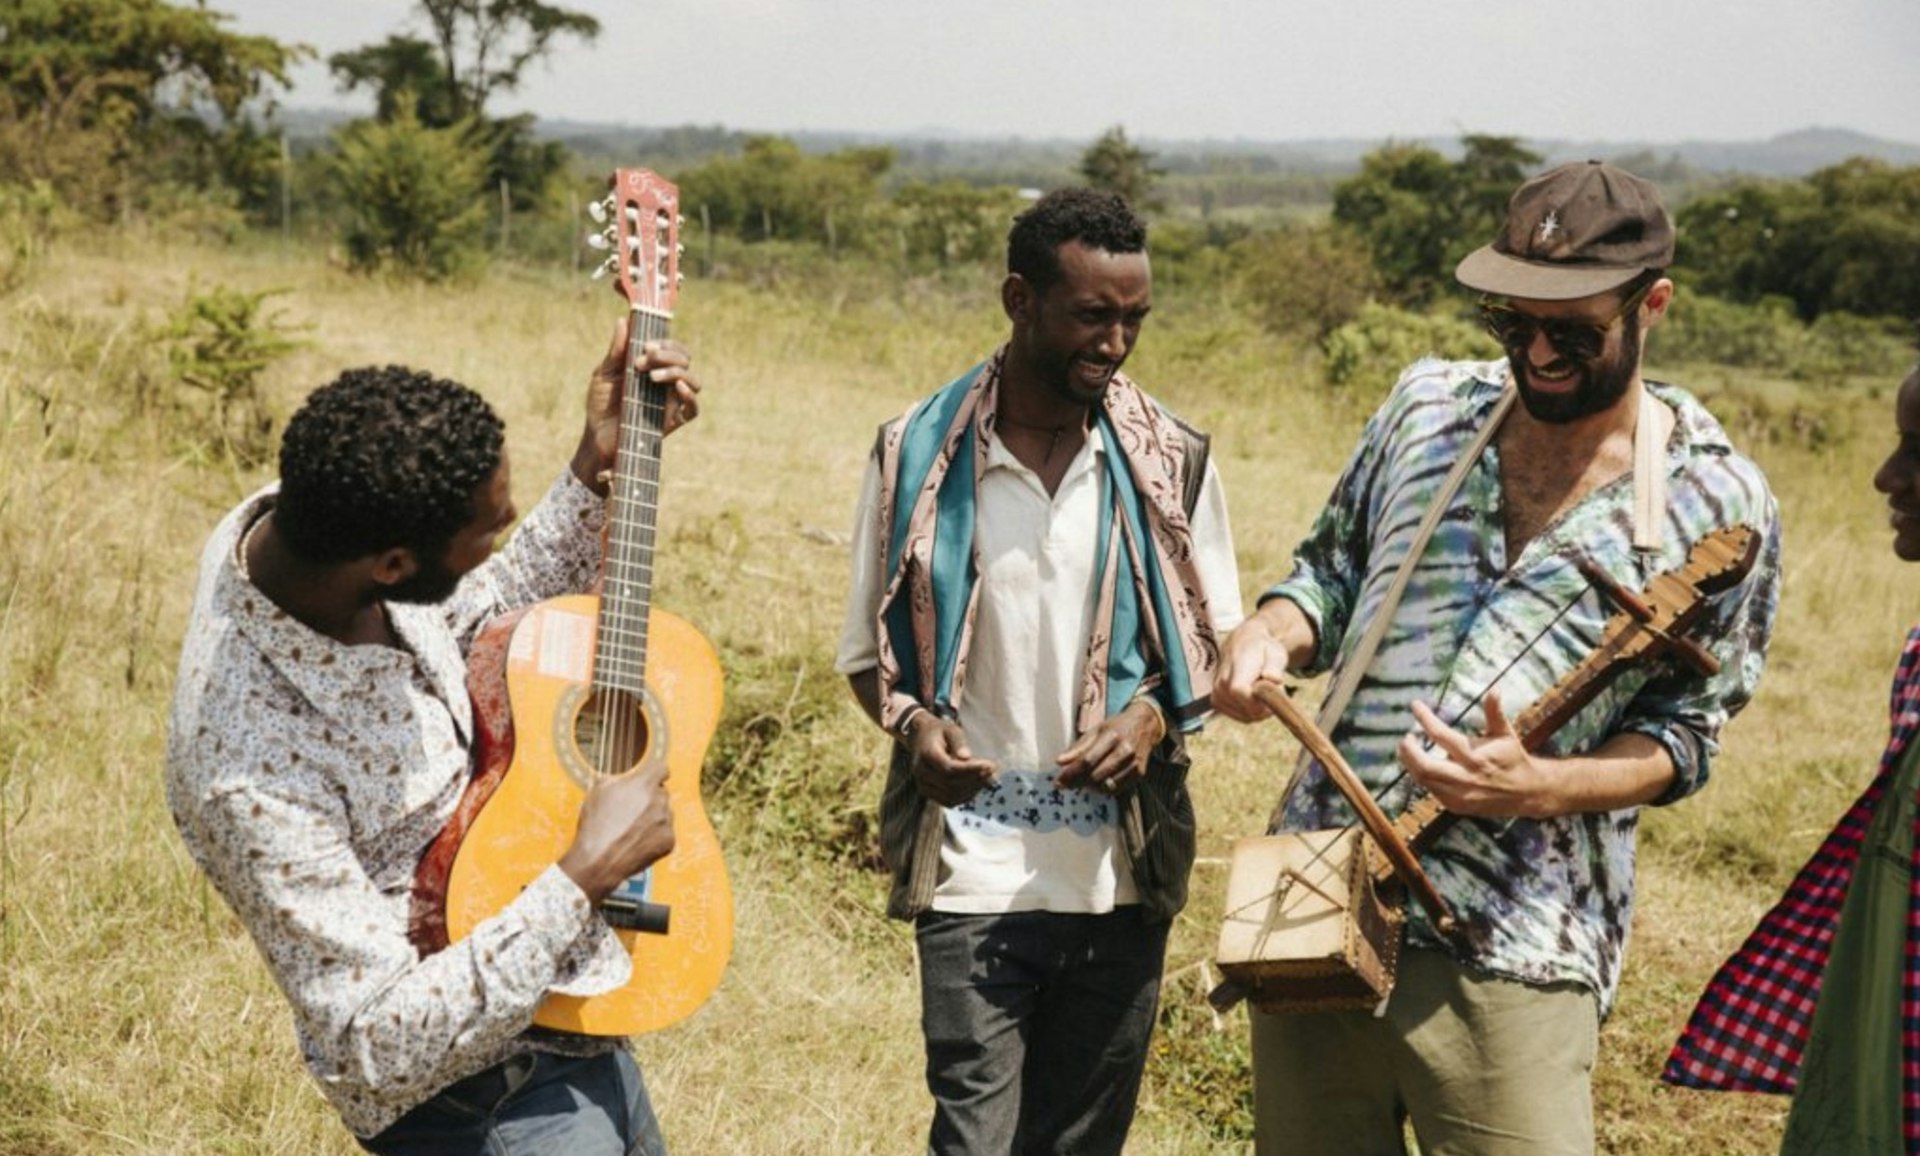 An Ethiopian road trip with the Crystal Fighters